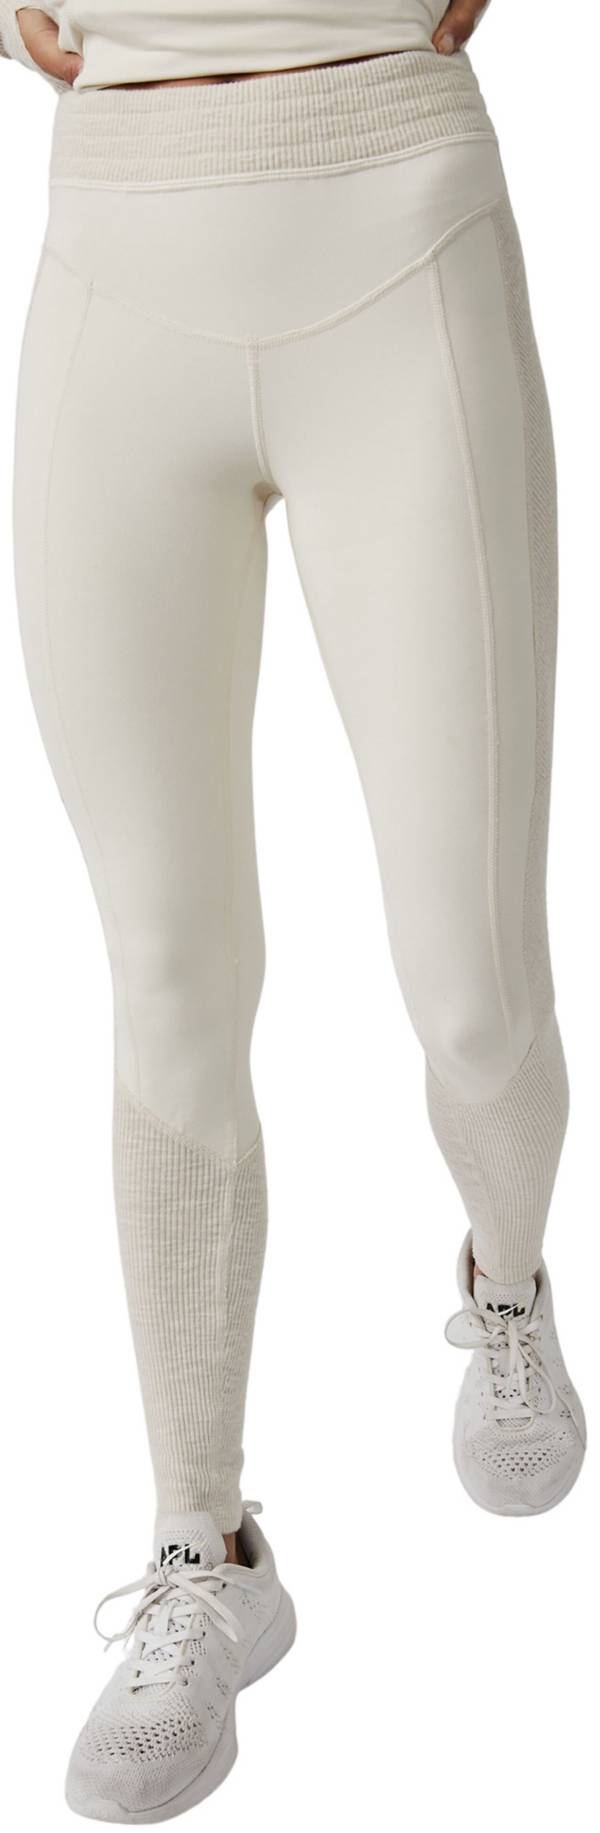 FP Movement by Free People Women's Undercover Baselayer Leggings product image